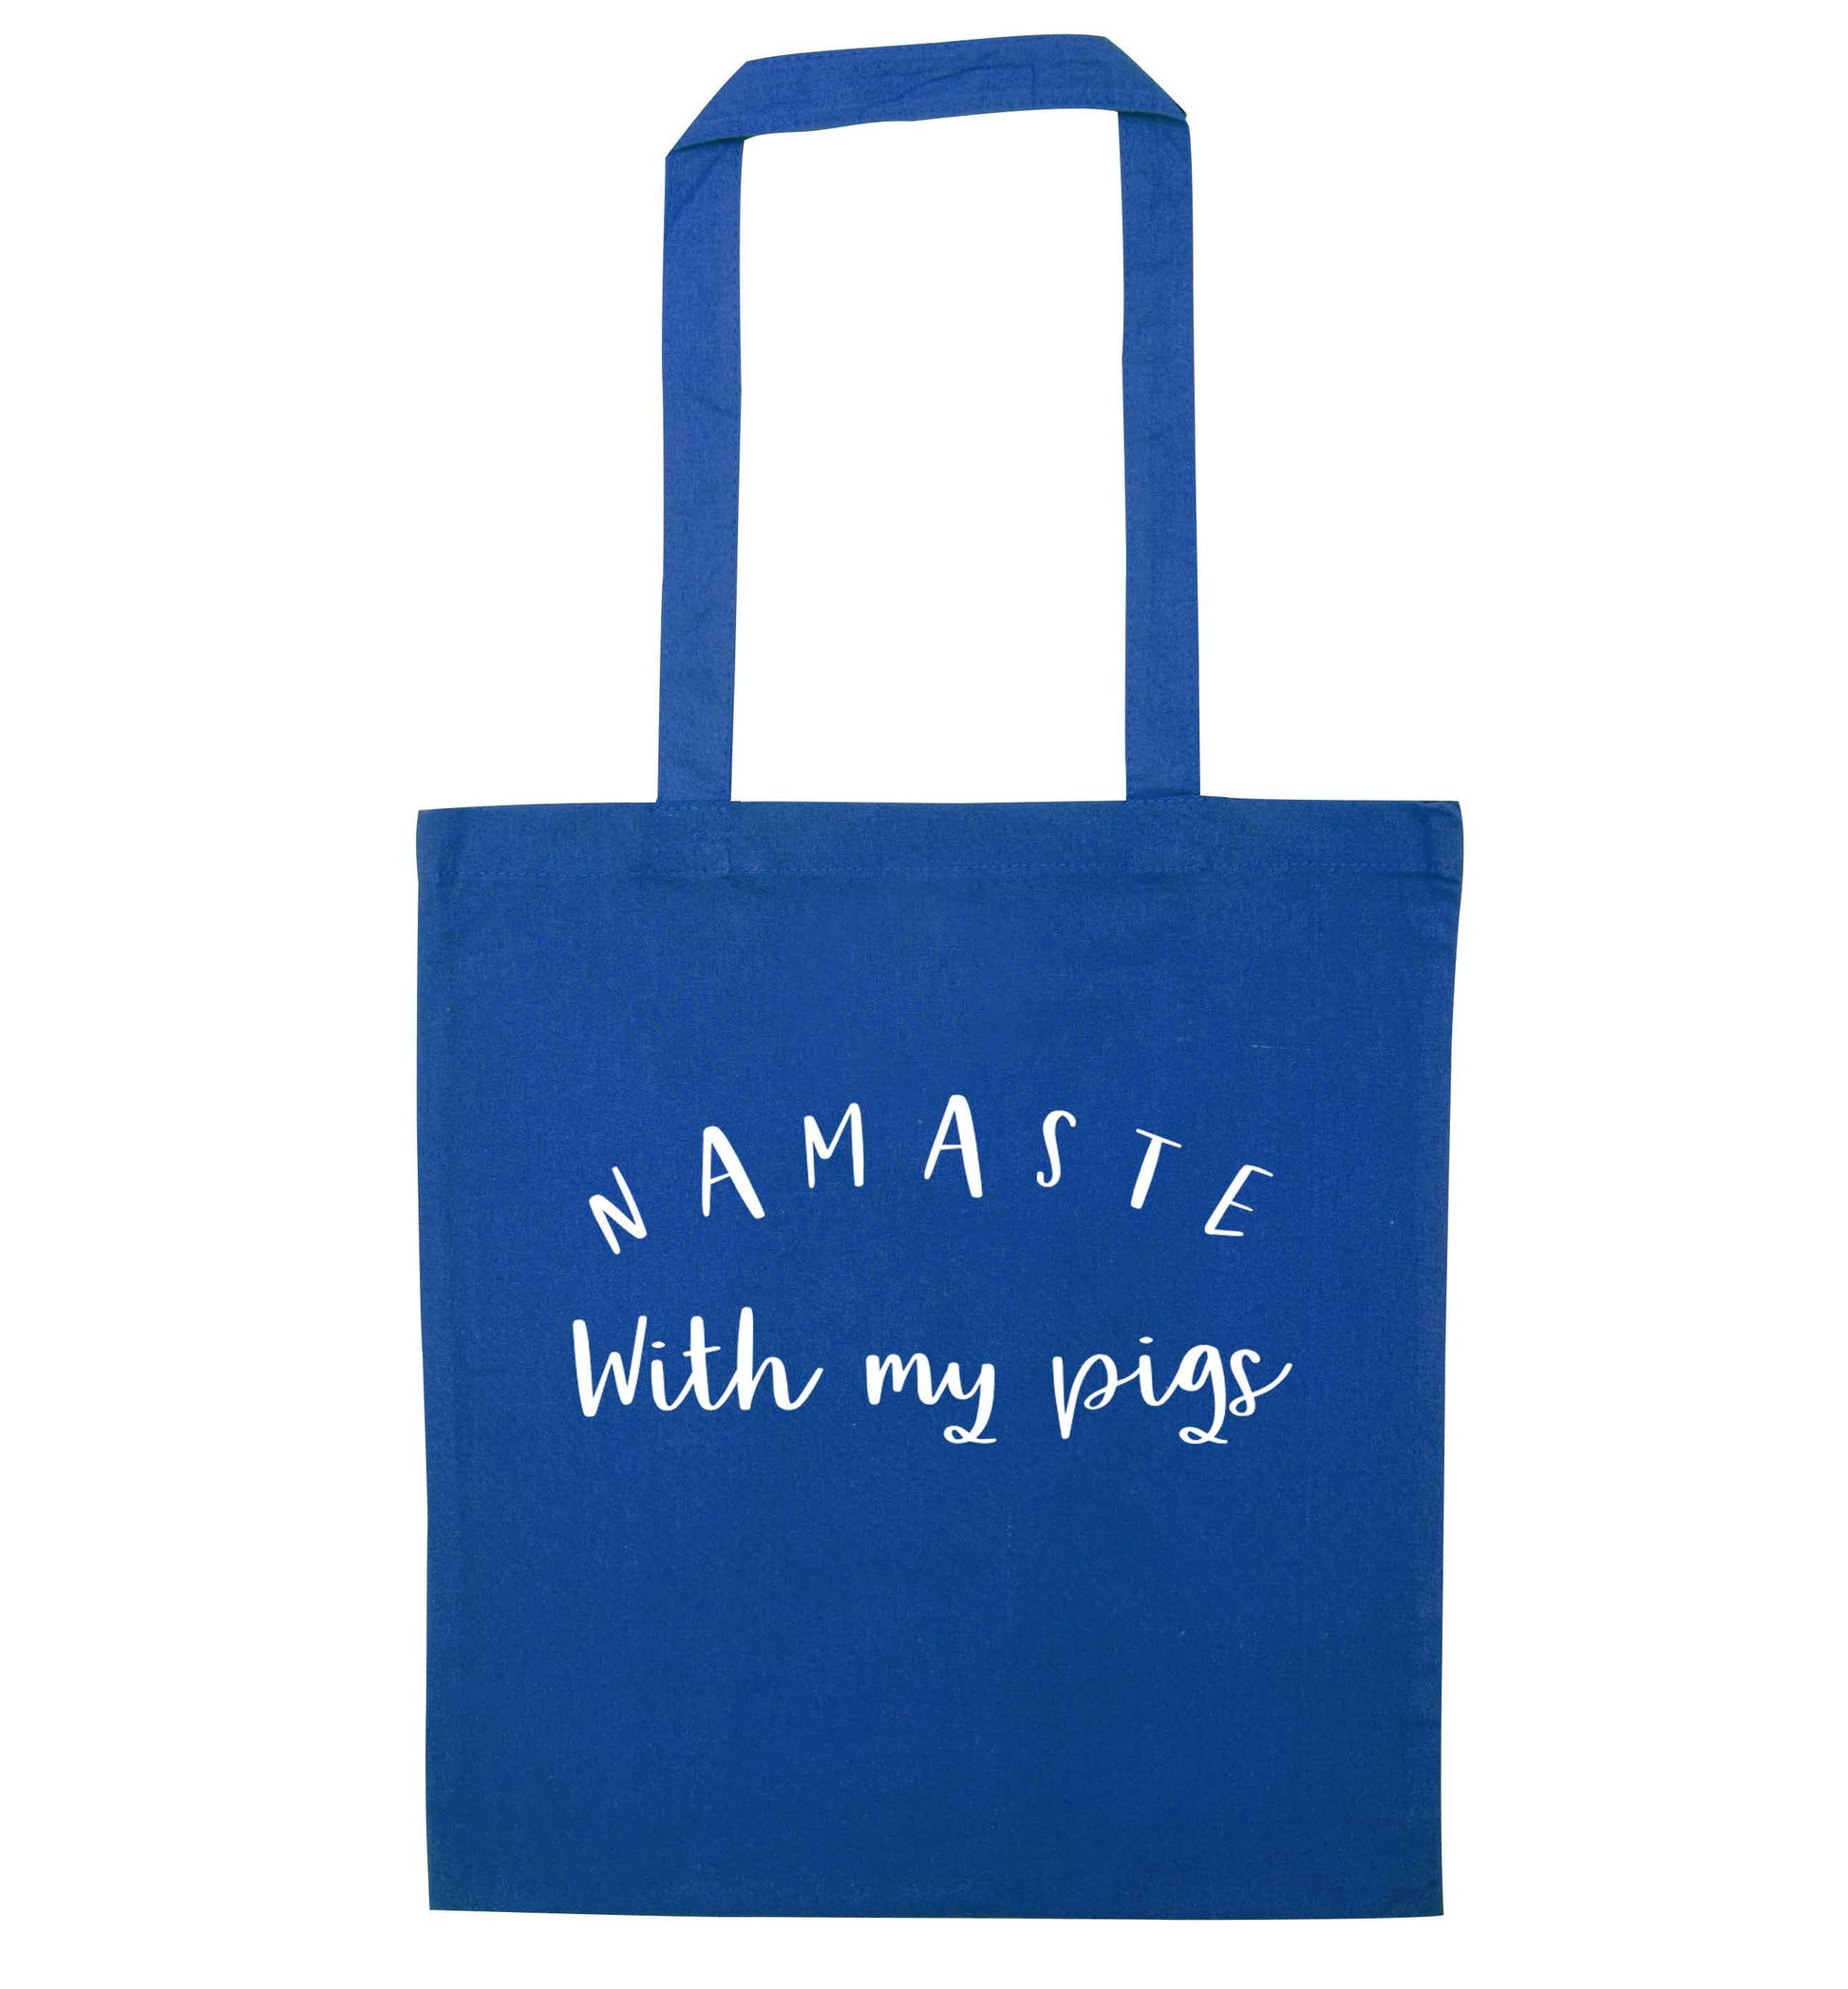 Namaste with my pigs blue tote bag